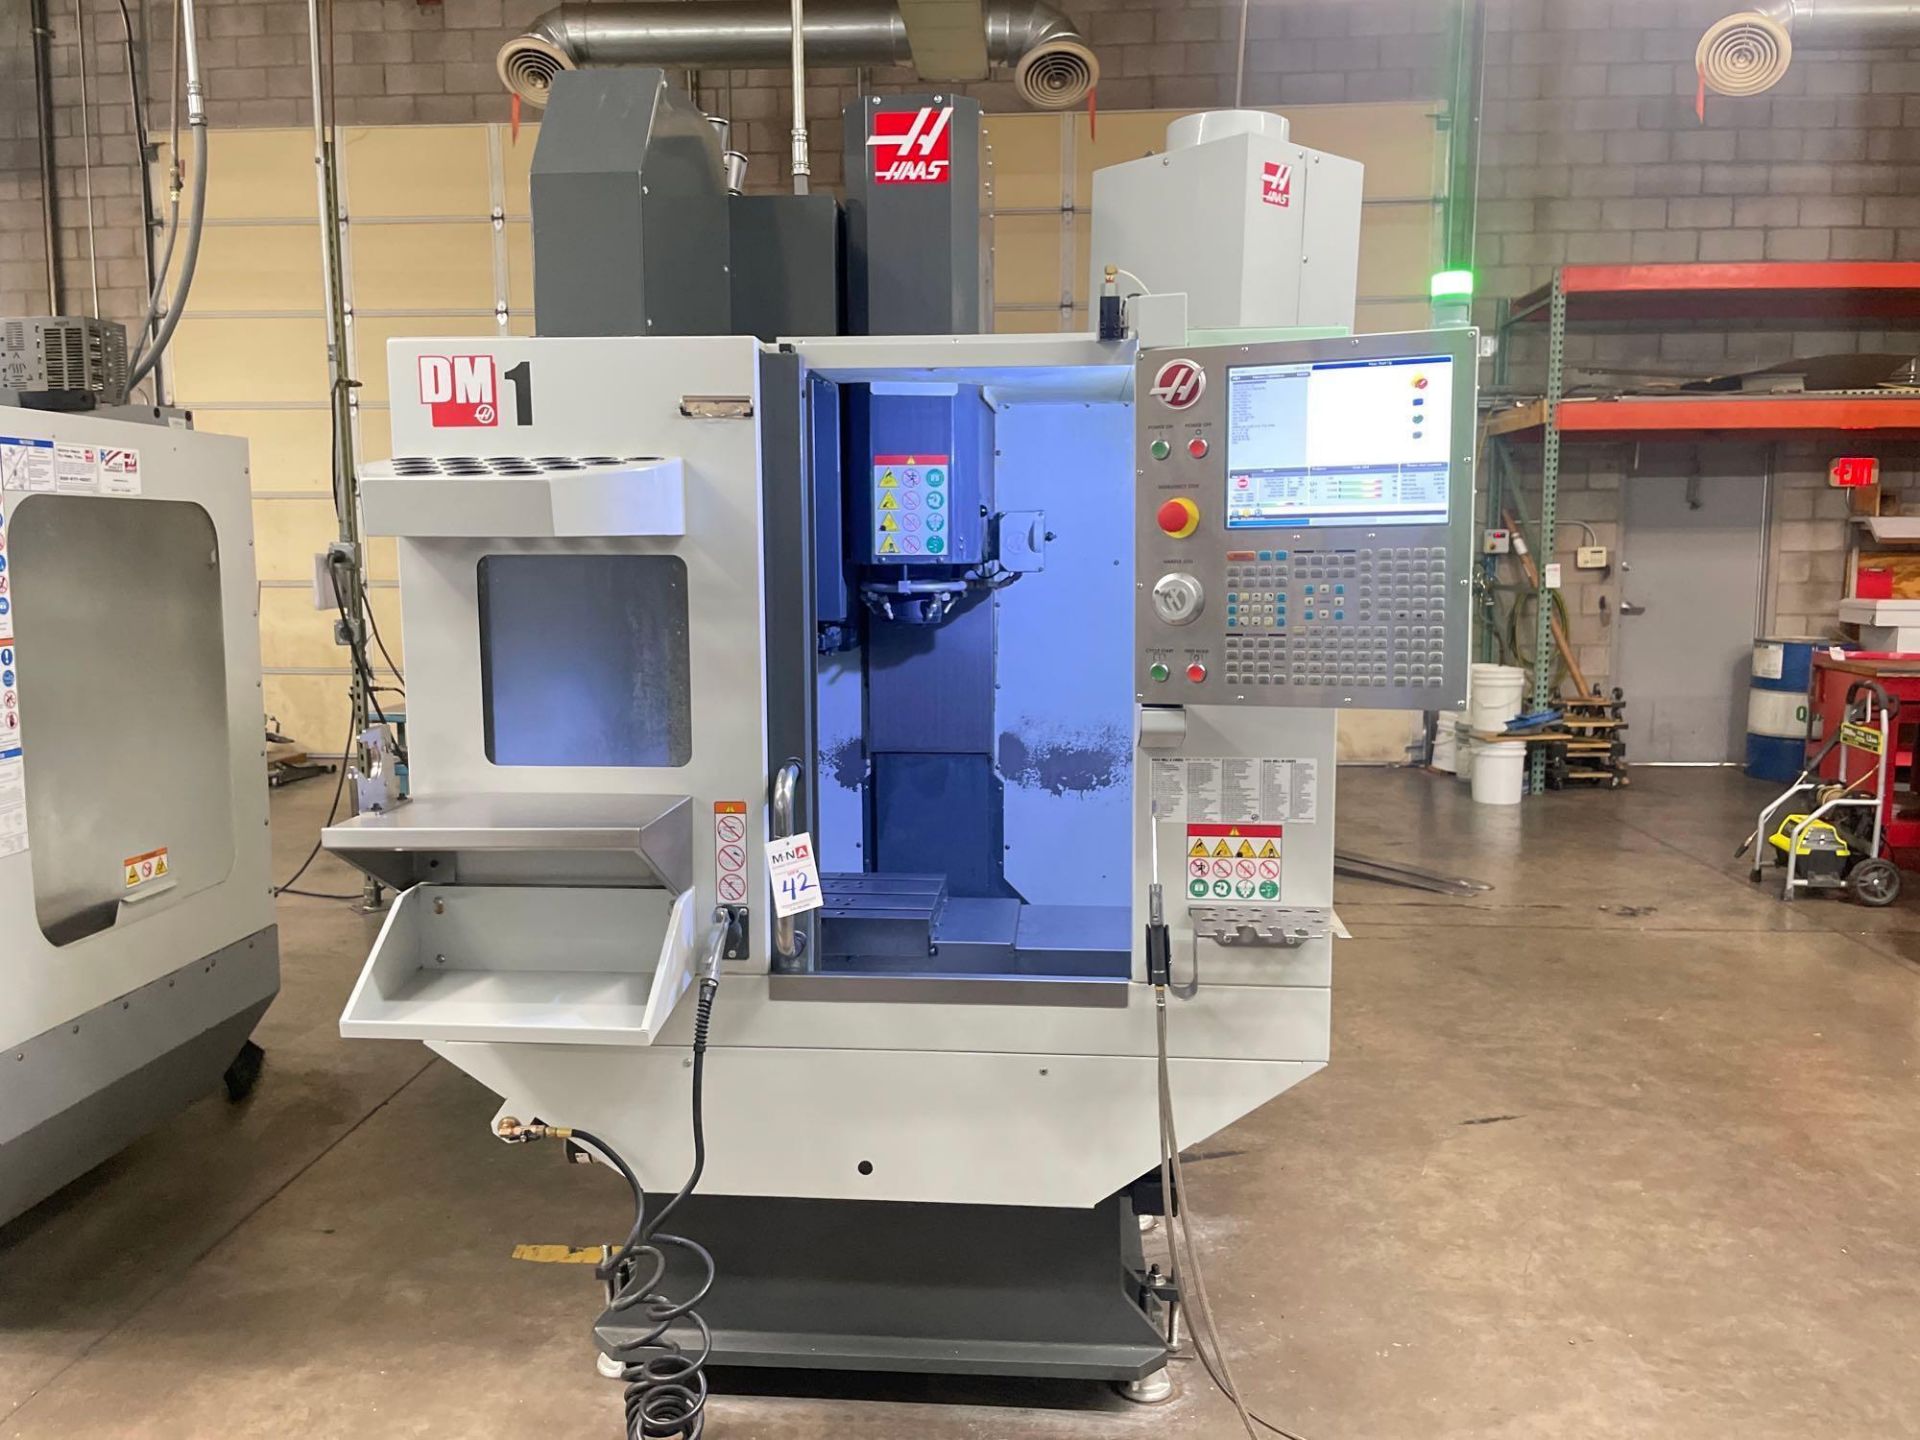 HAAS DM-1 Vertical Machining Center, 4th- Axis Ready, 20” x 16” x 15.5” Trvls., 15k RPM, New 2017 - Image 2 of 12